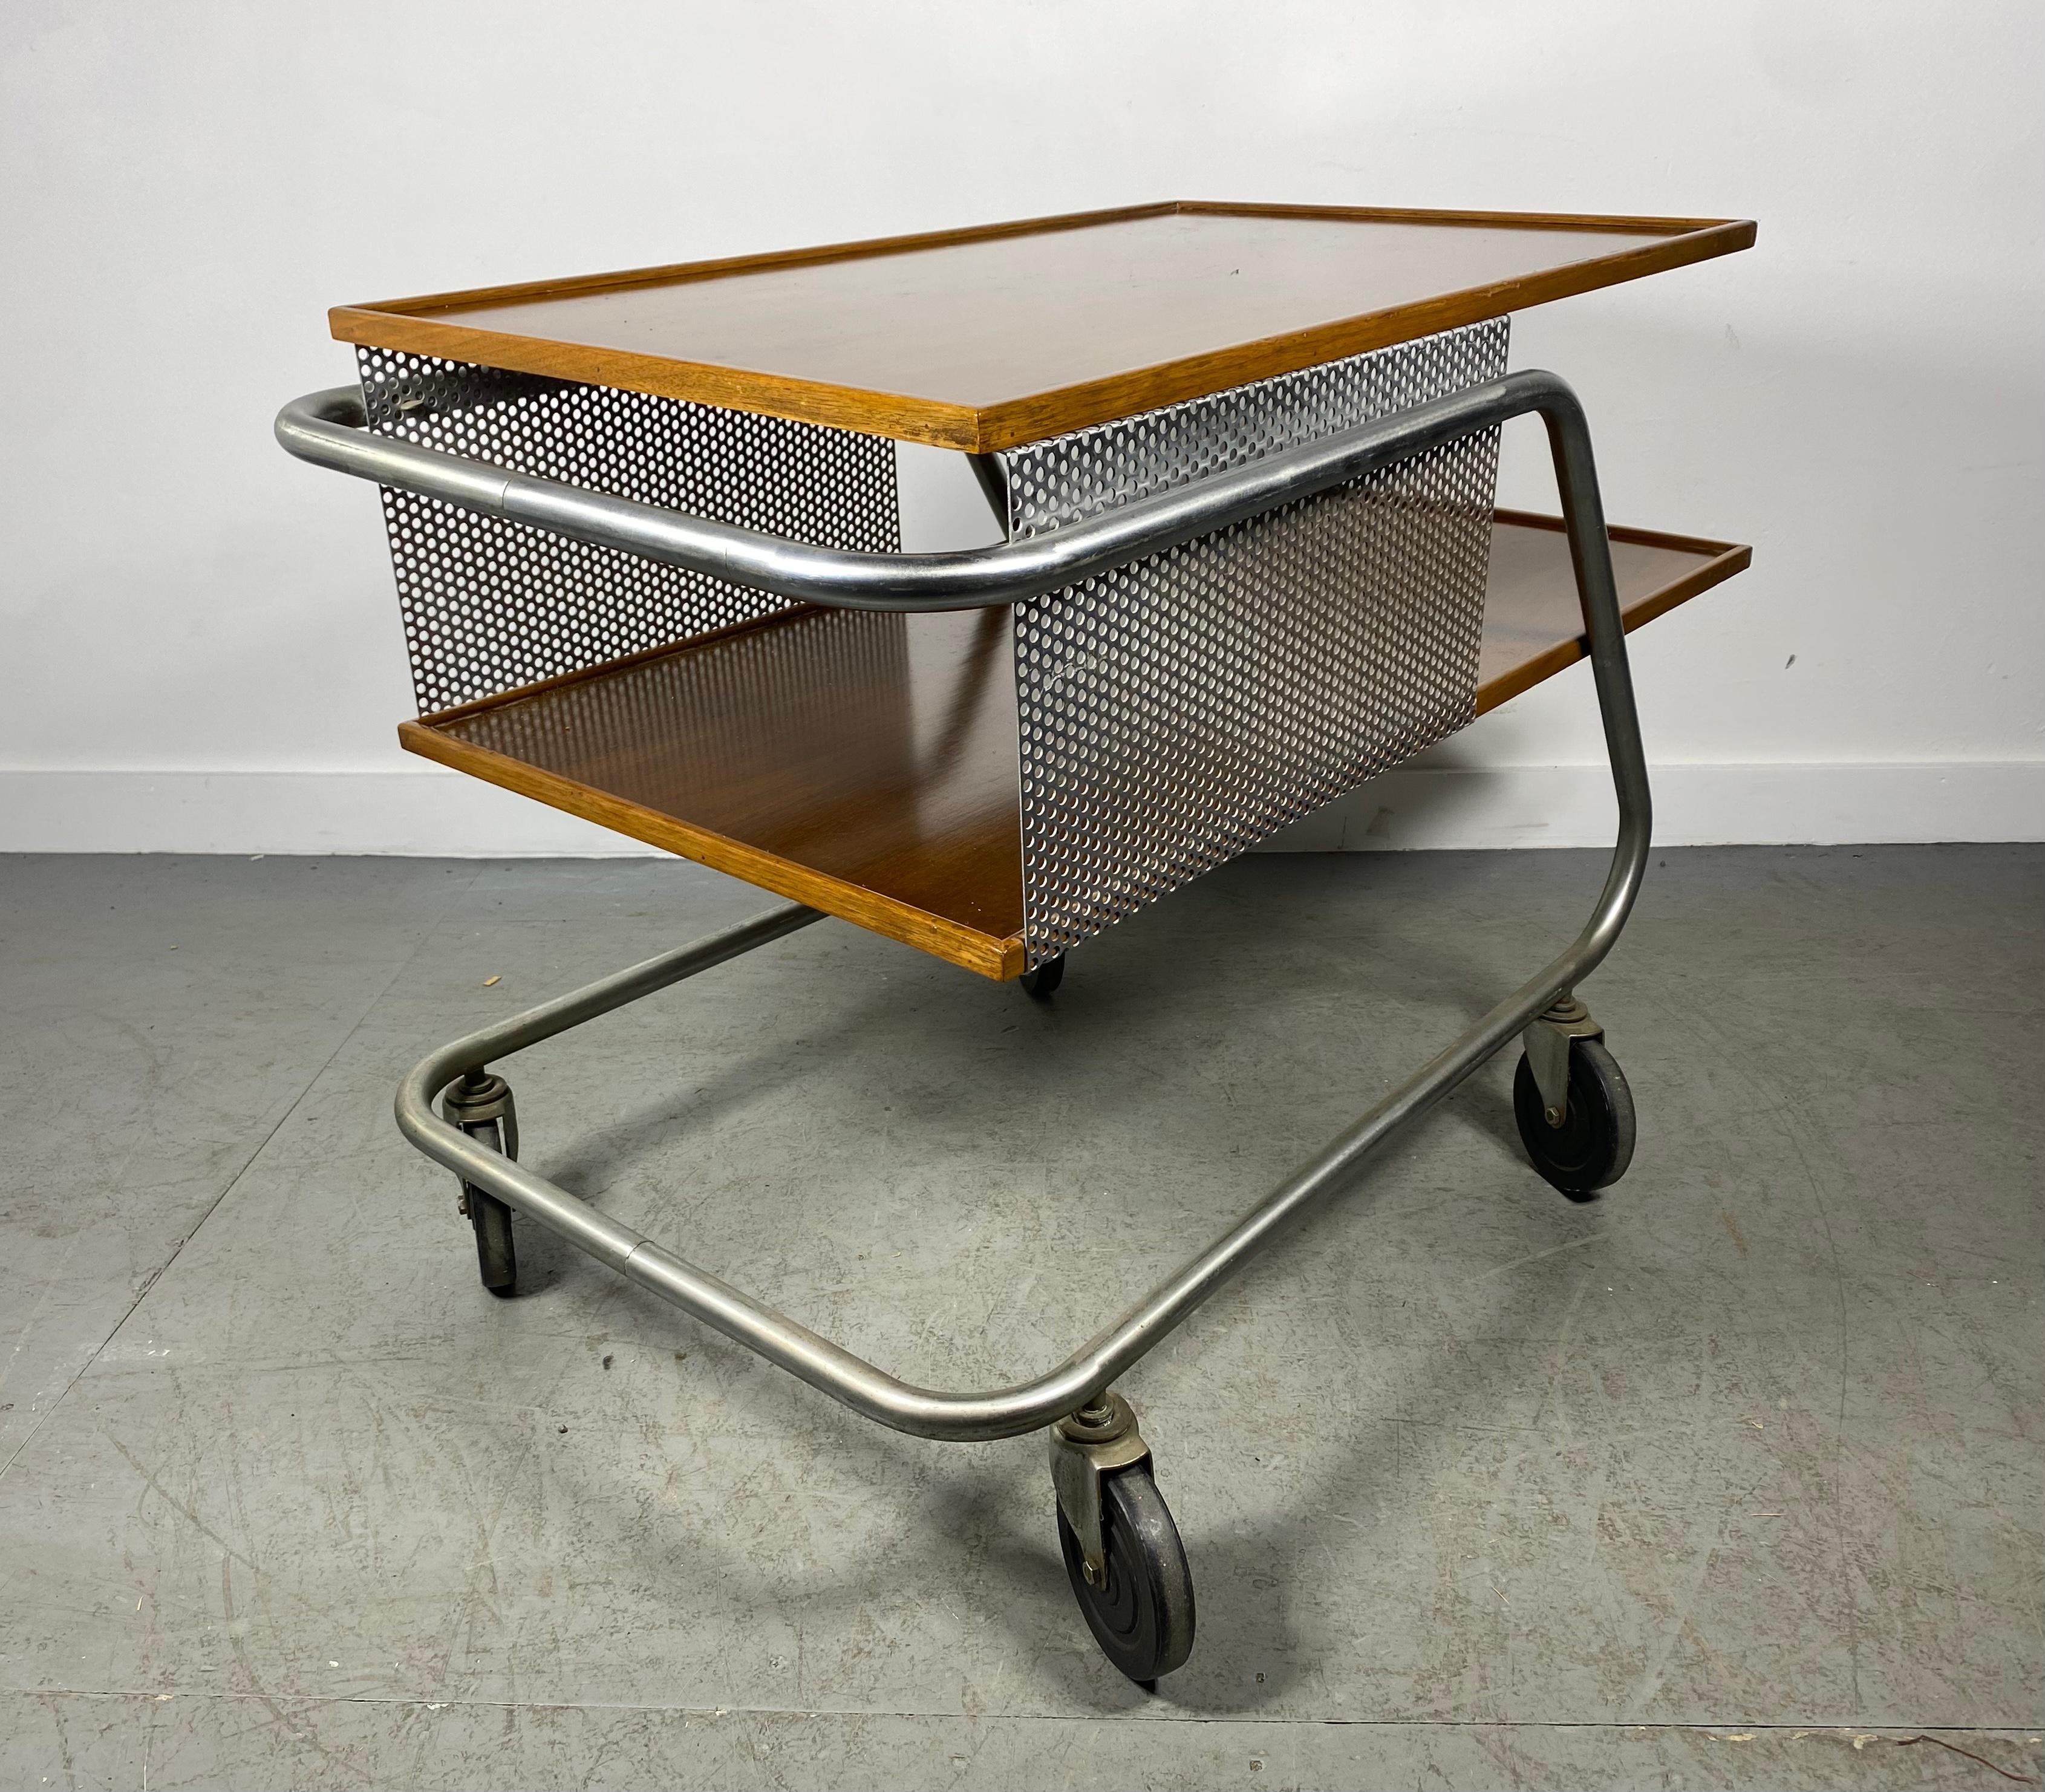 A perforated metal and wood bar / service cart with laminate top and rubber wheels rolling around on a steel tube frame. Franziska the designer studied Bauhaus design at Harvard under Gropius, Kepes, Moholy- Nagy and Breuer. This piece garnered wide